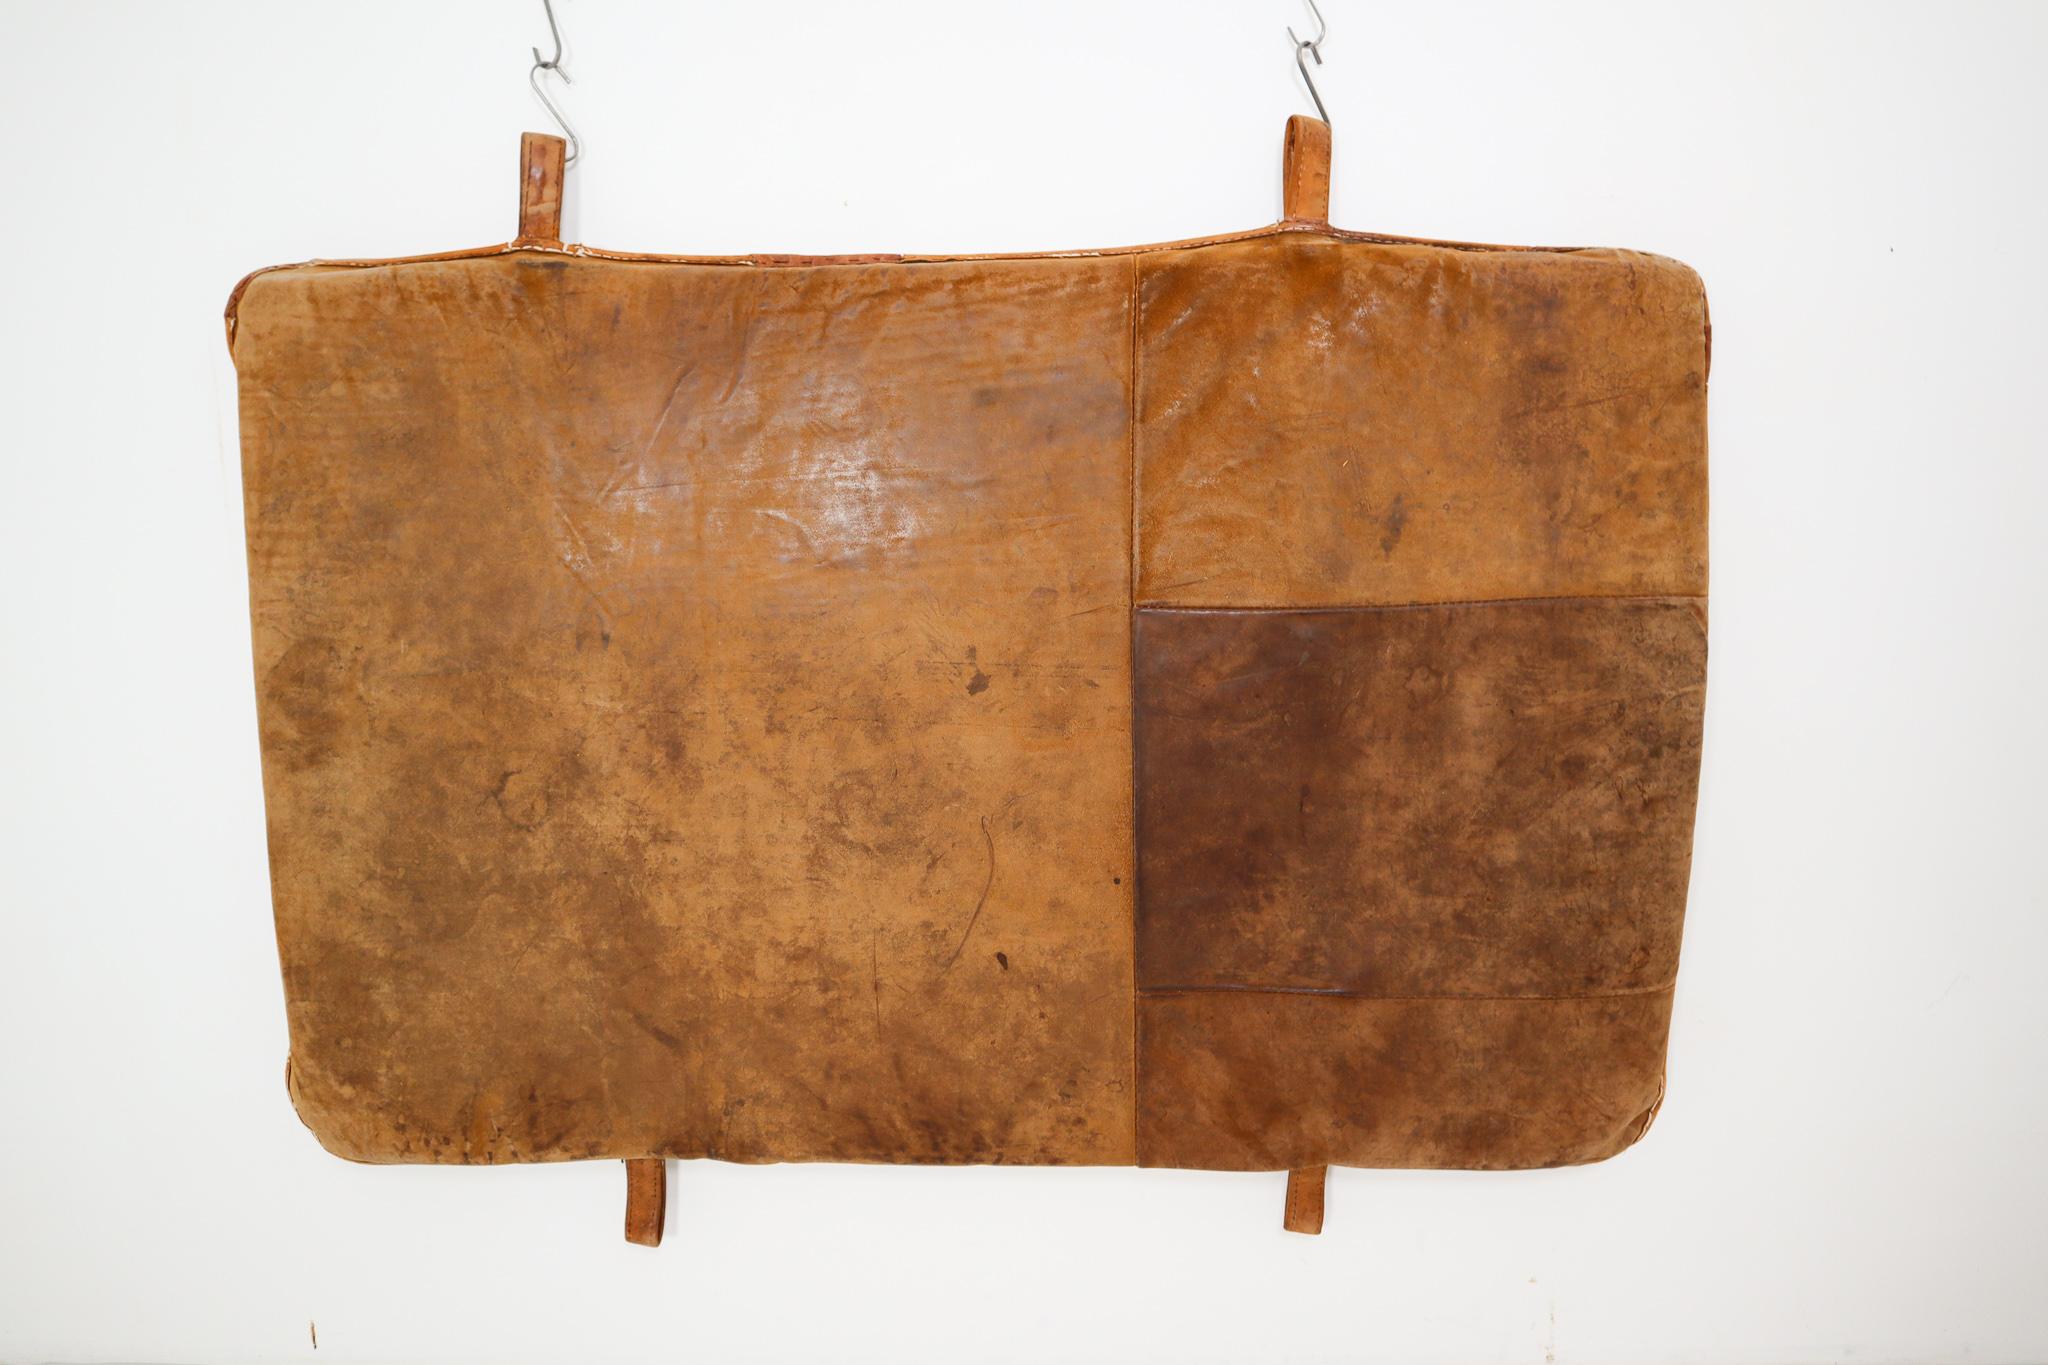 This brown leather gym mat originally used in the gym, now ideal in the home as a bedhead, or a playmat. The gym mat is in a very good vintage condition with original patina. And is made in Czech Republic, 1950s.